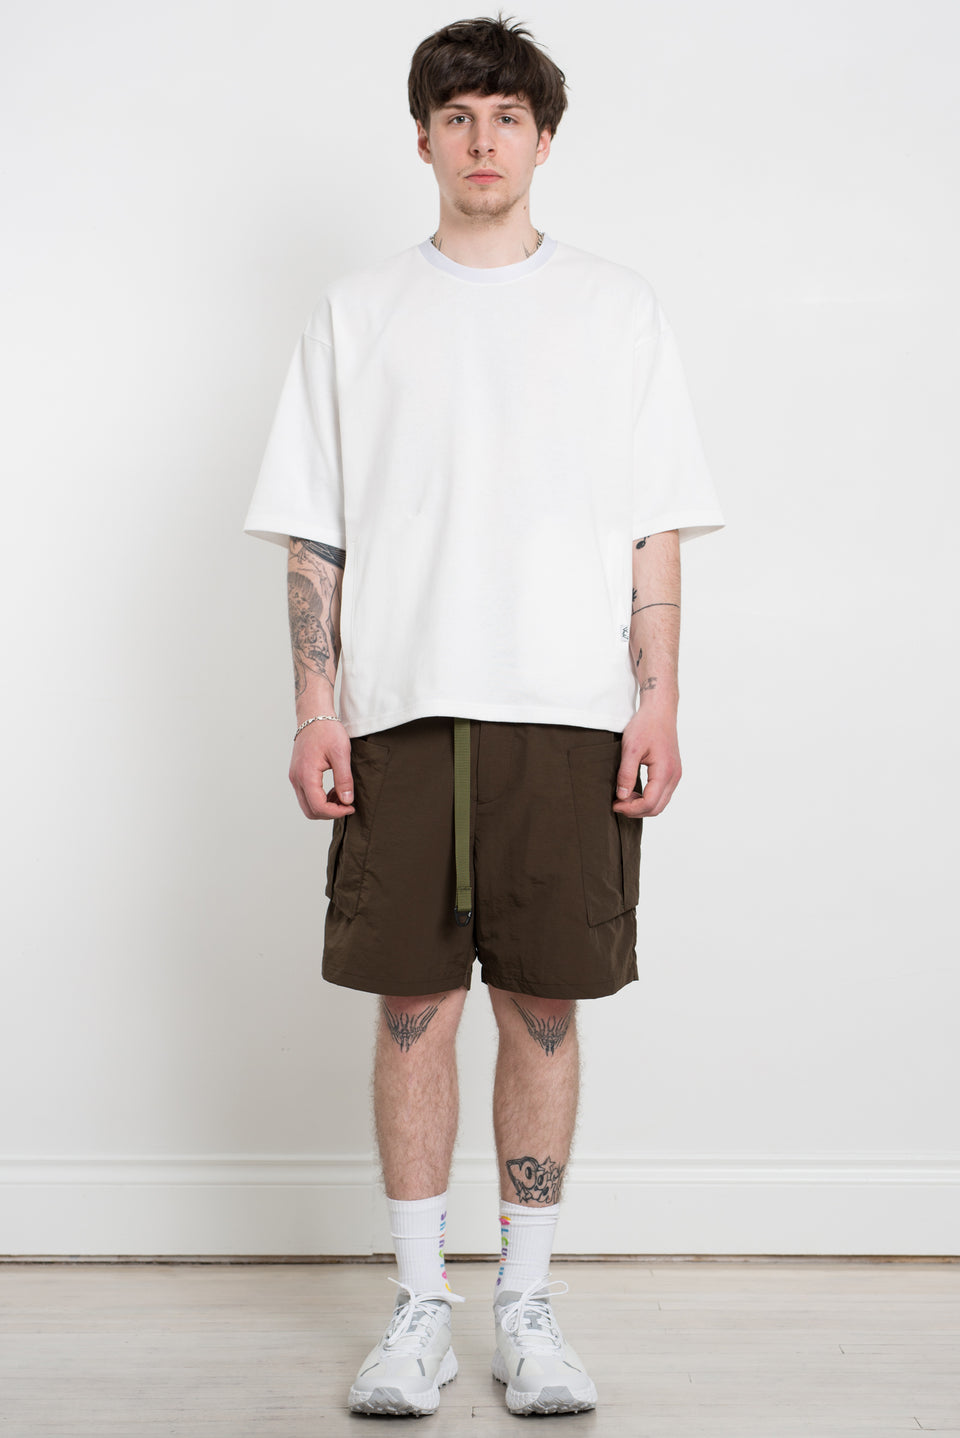 CMF Outdoor Garment 23SS SS23 Comfy Outdoor Garment Slow Dry Tee Half Sleeve White Calculus Victoria BC Canada